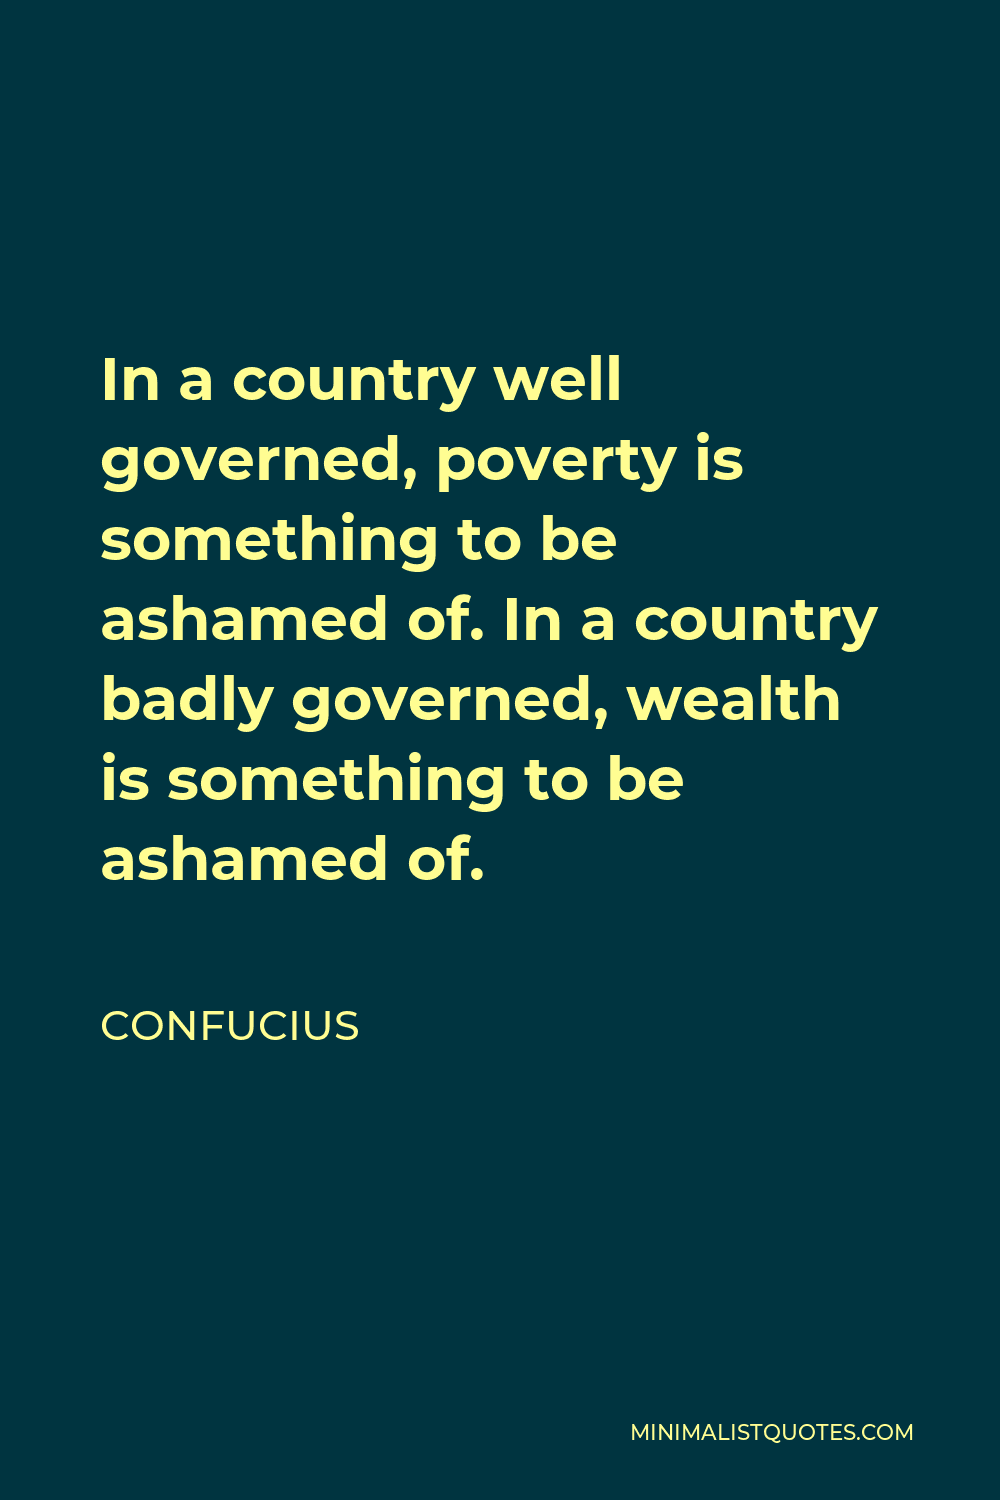 Confucius Quote - In a country well governed, poverty is something to be ashamed of. In a country badly governed, wealth is something to be ashamed of.